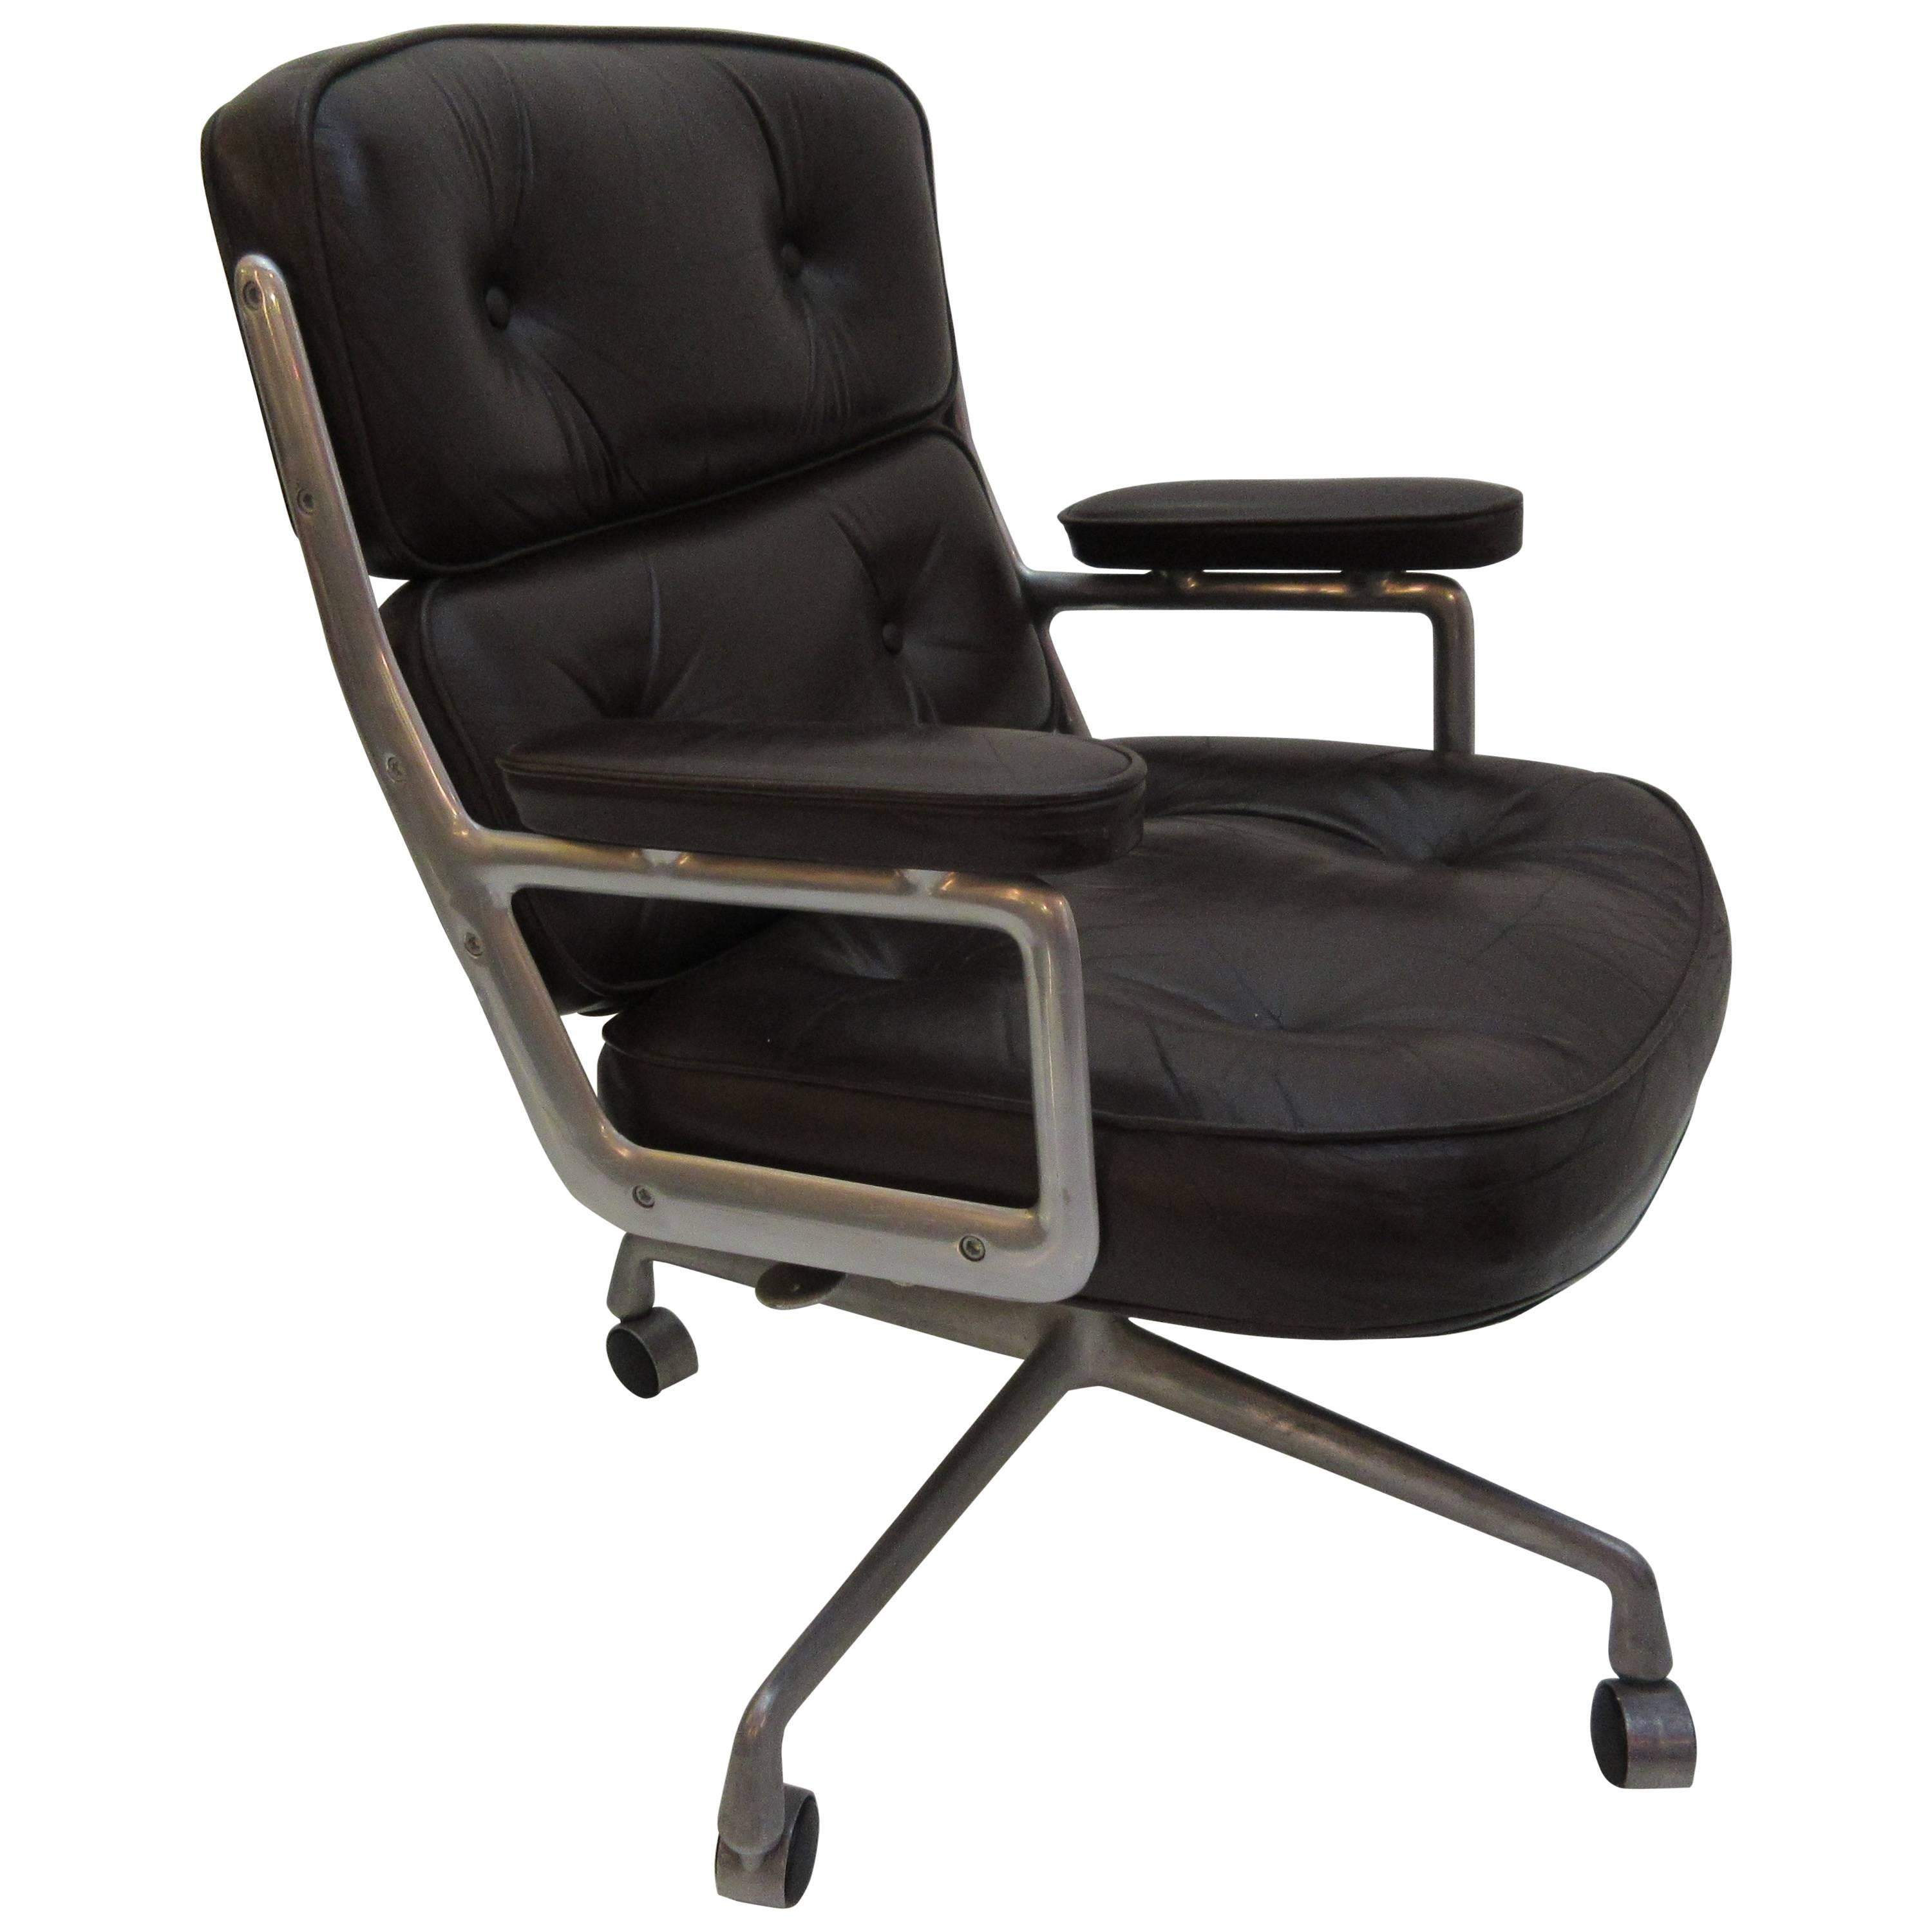 Charles and Ray Eames Time Life Chair by Herman Miller